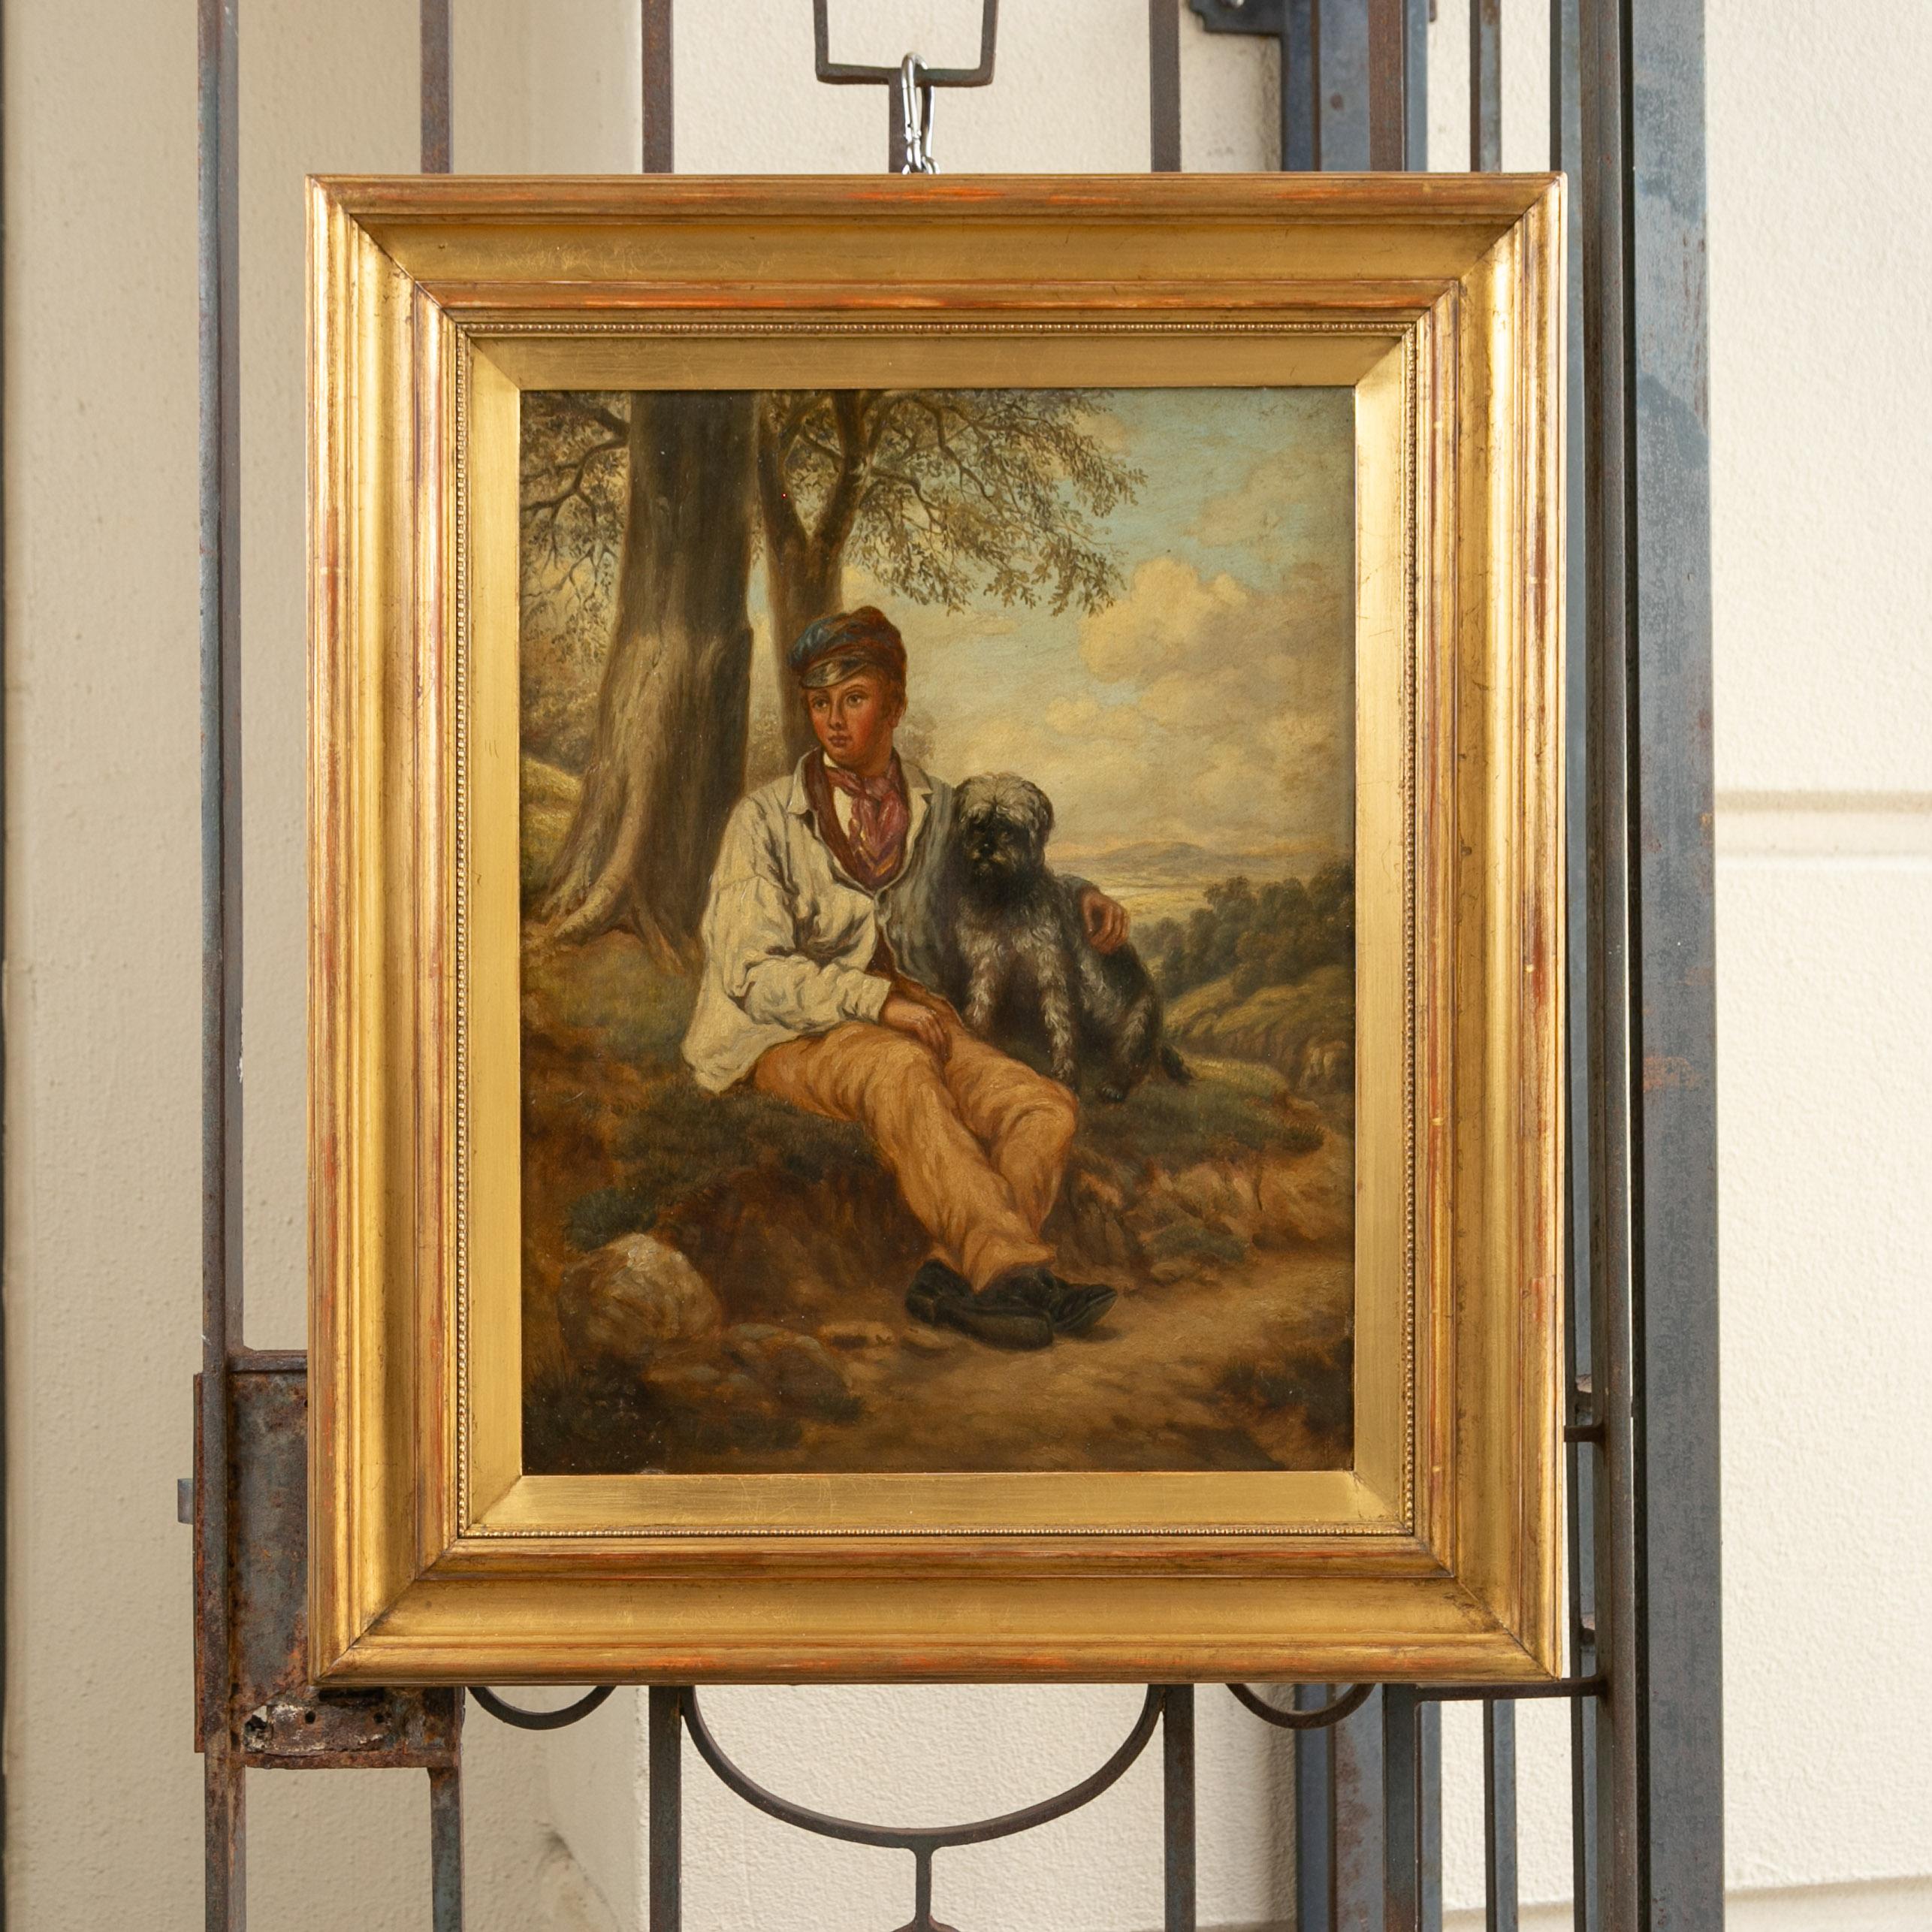 An English oil on canvas painting from the late 19th century depicting a boy sitting with his dog, in antique giltwood frame. Created in England during the last quarter of the 19th century, this oil on canvas painting charms us with its heartwarming